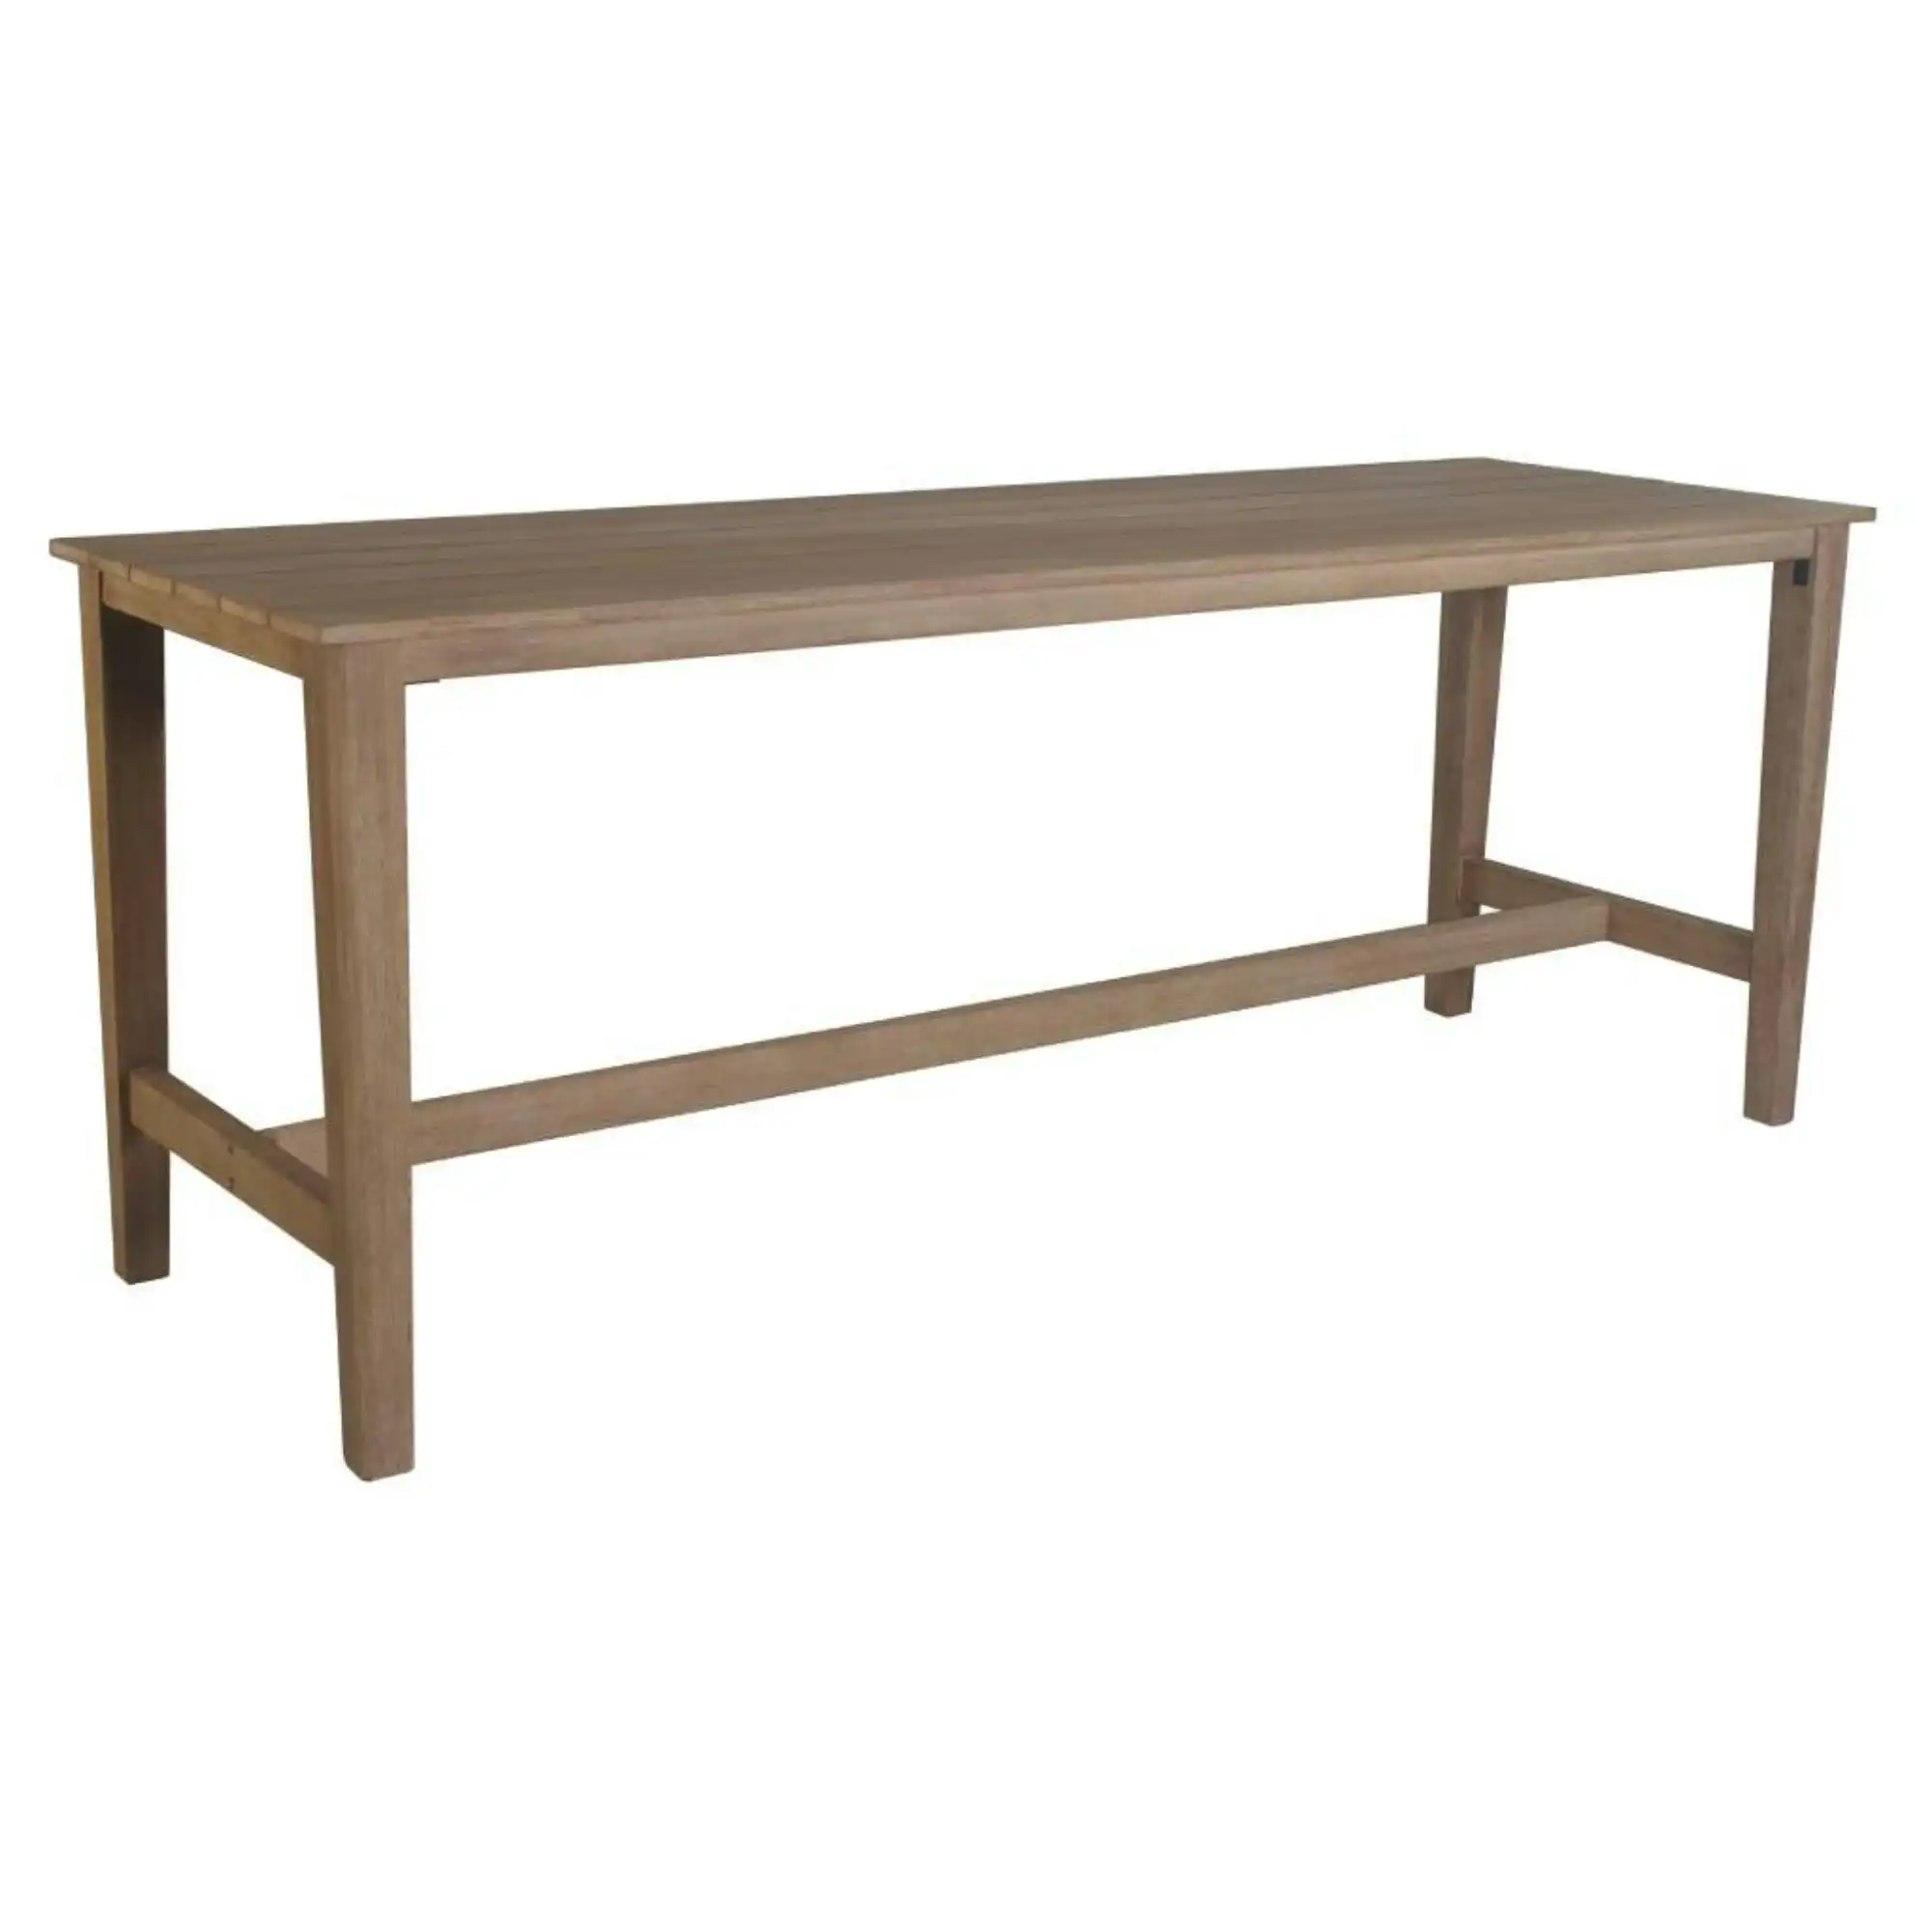 Stud 240cm Outdoor High Bar Dining Table